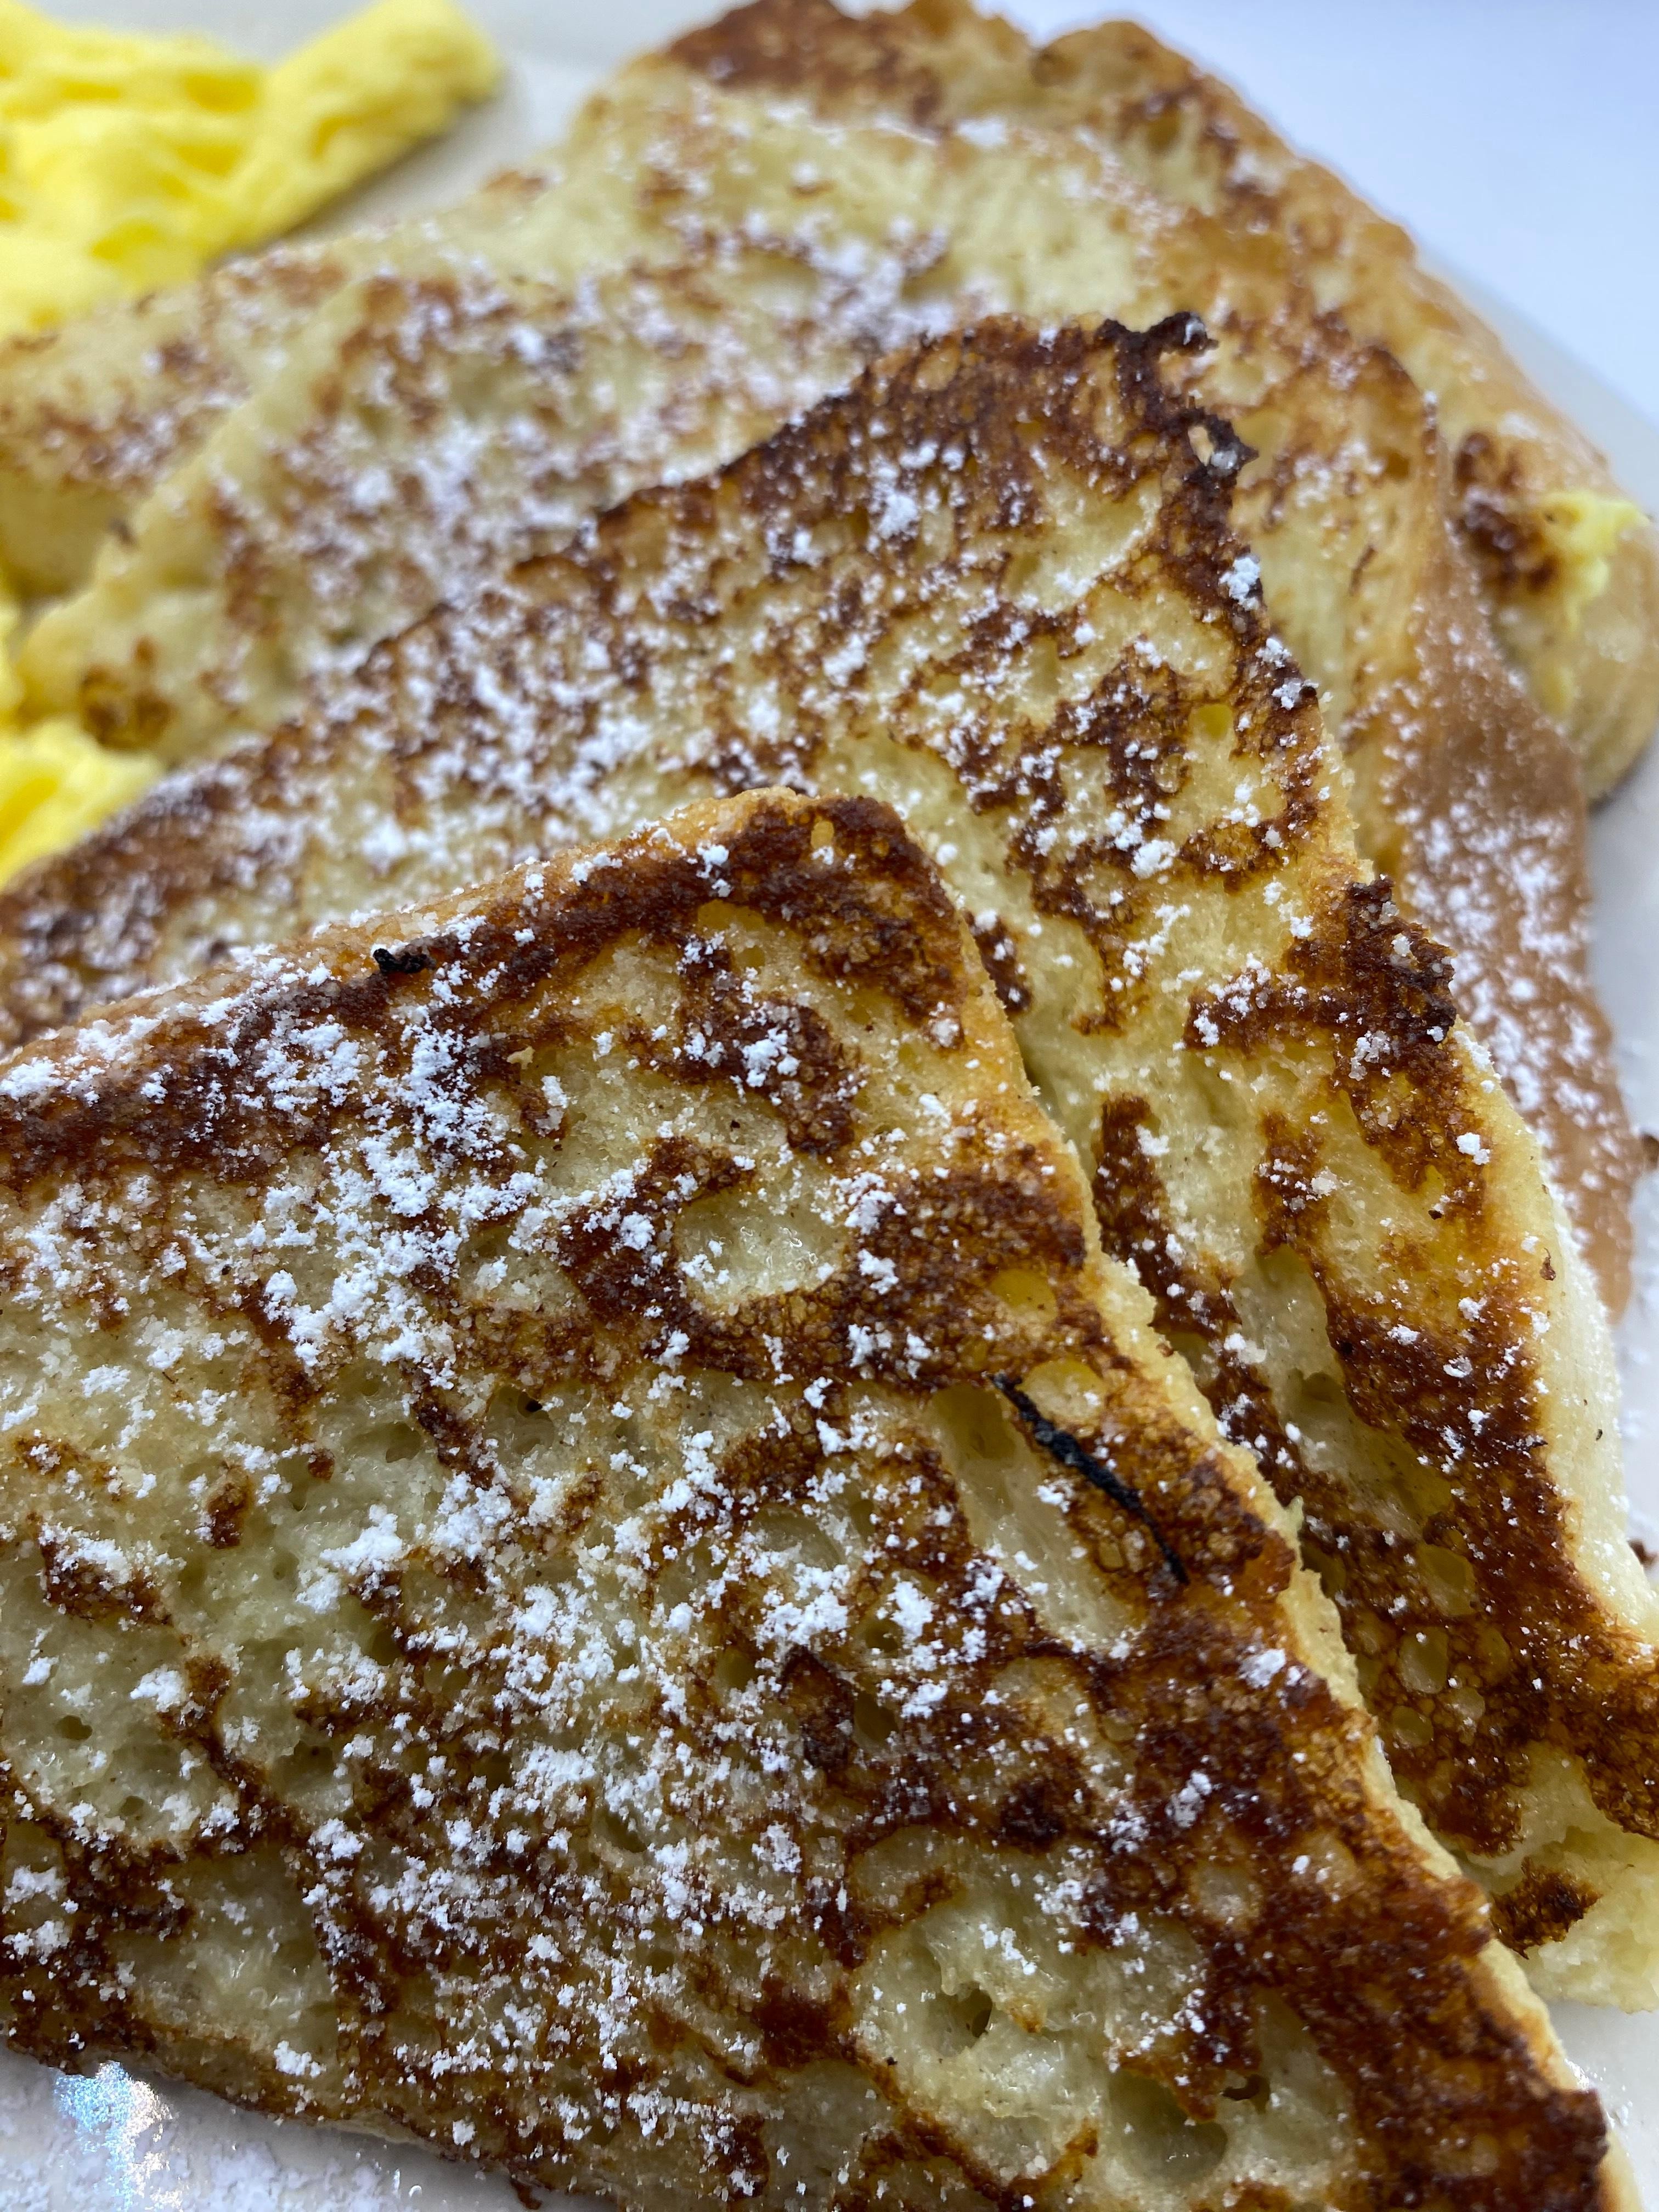 2 PC. FRENCH TOAST